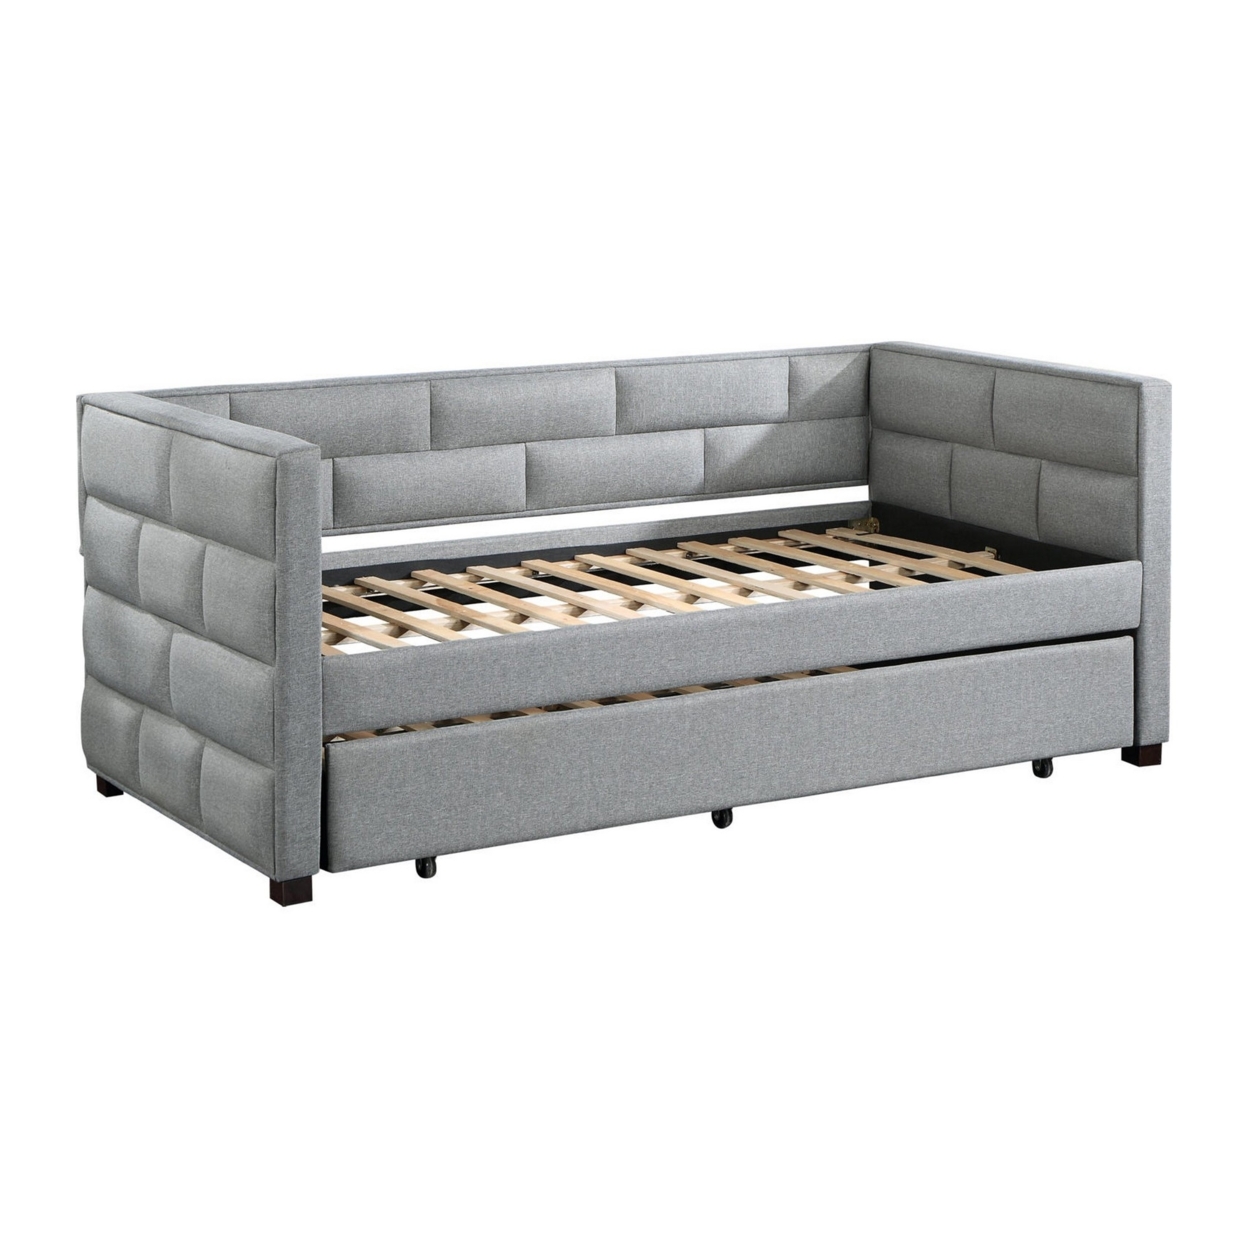 Classic Wood Daybed With Trundle, Upholstered, Brick Style Tufting, Gray- Saltoro Sherpi